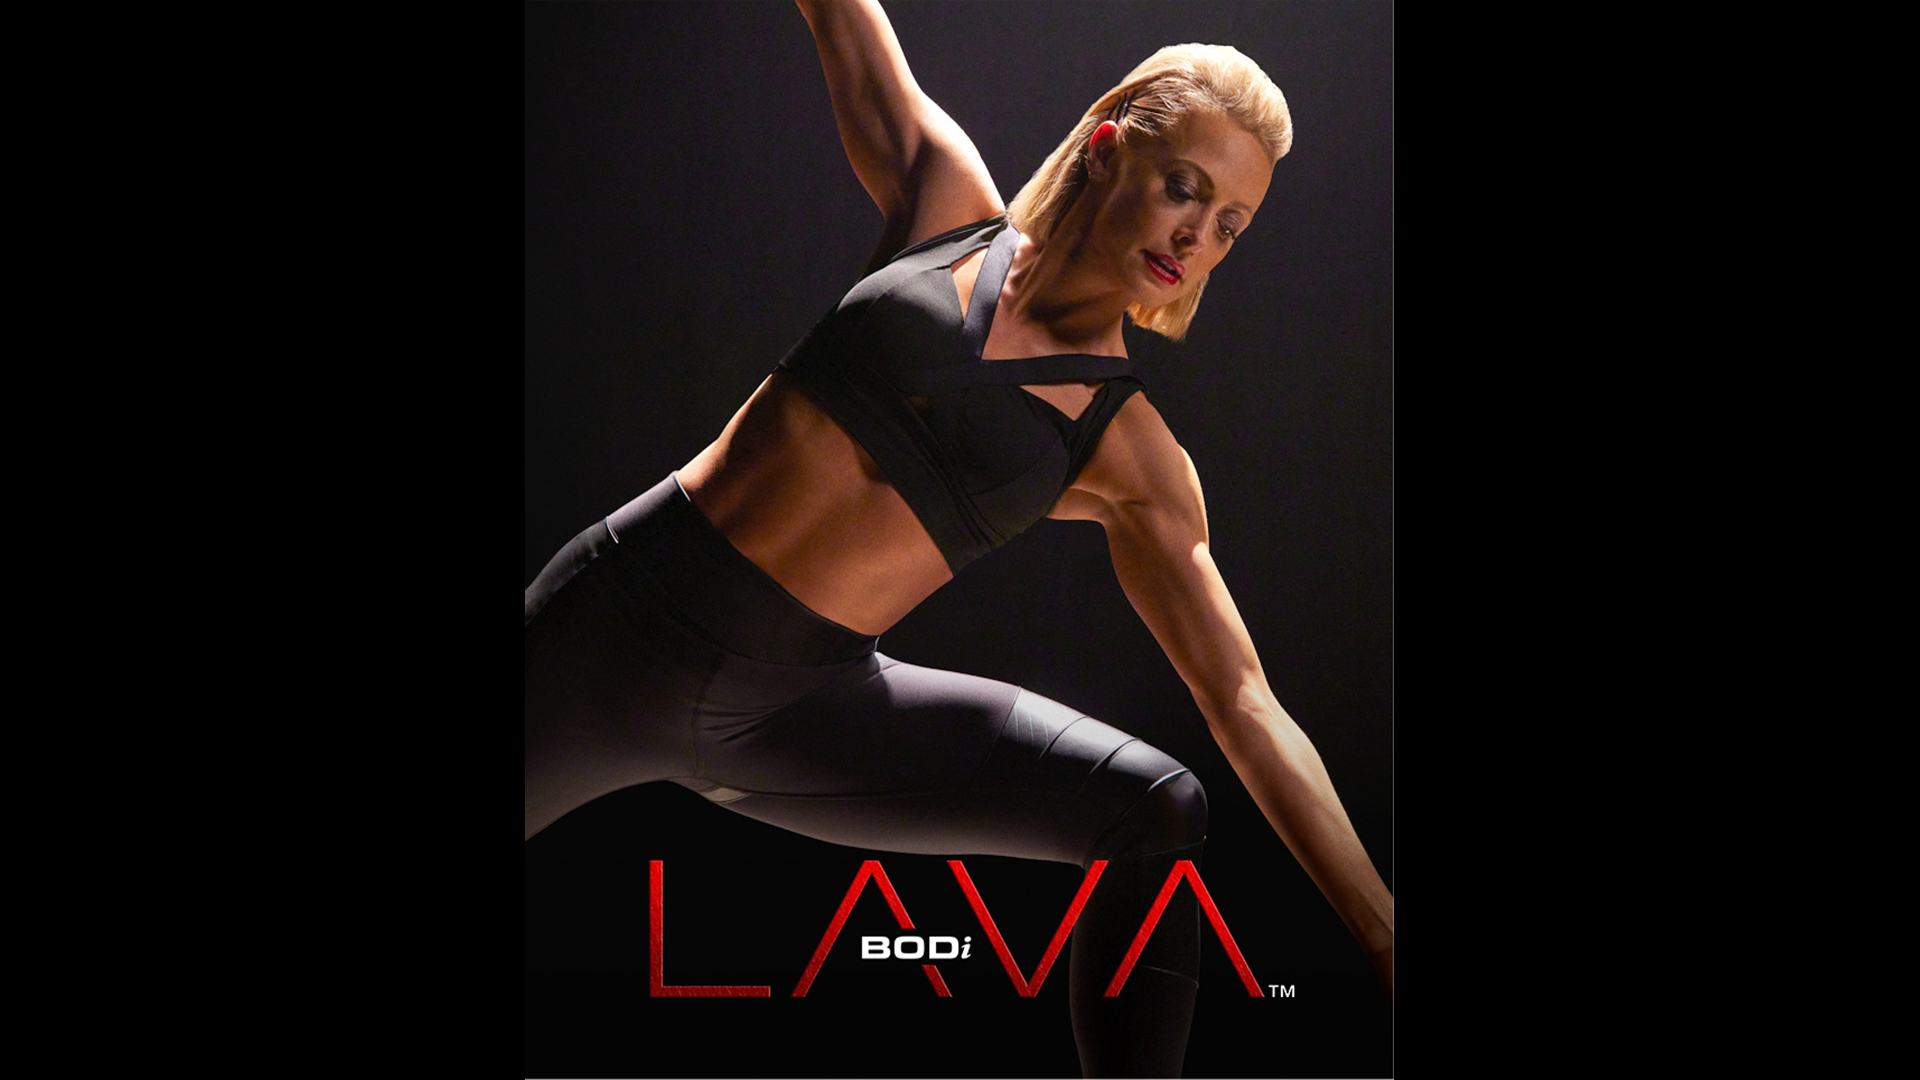 BODi by Beachbody Launches BODi LAVA, the Perfect Summer Fitness Program with Super Trainer Elise Joan